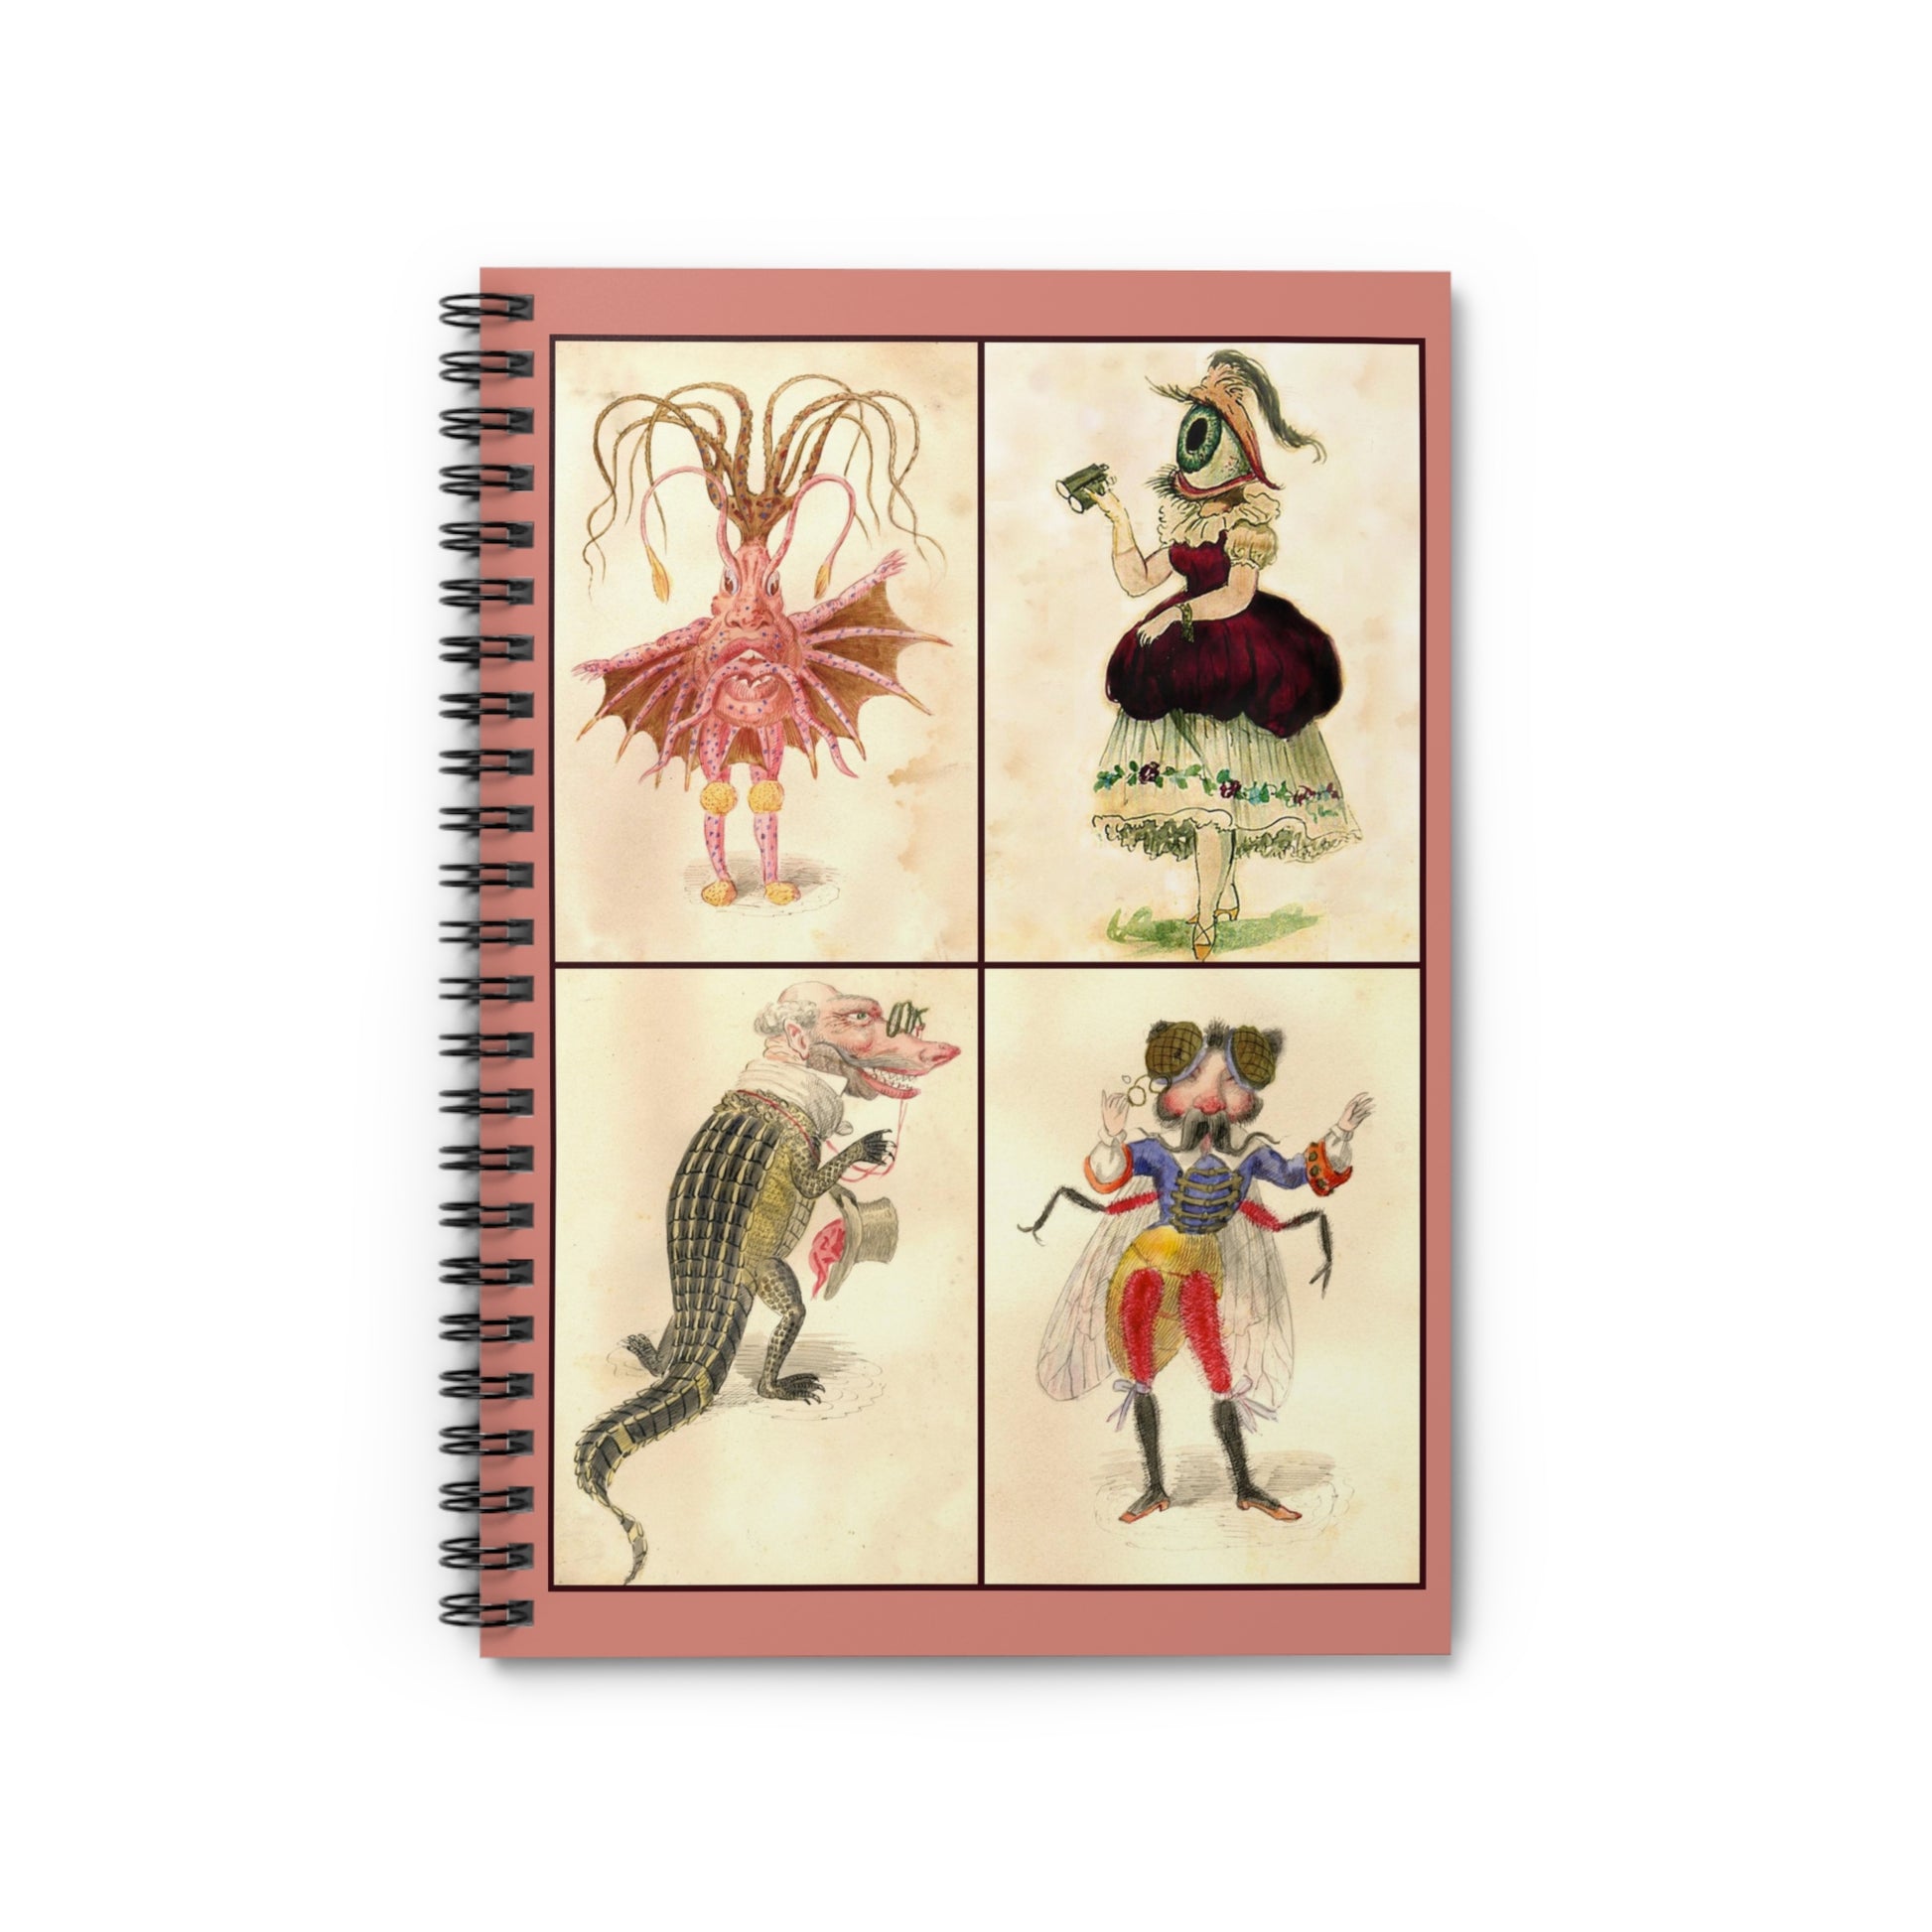 Front of notebook with four vintage Mardi Gras costume designs from the Krewe of Comus, pink border.